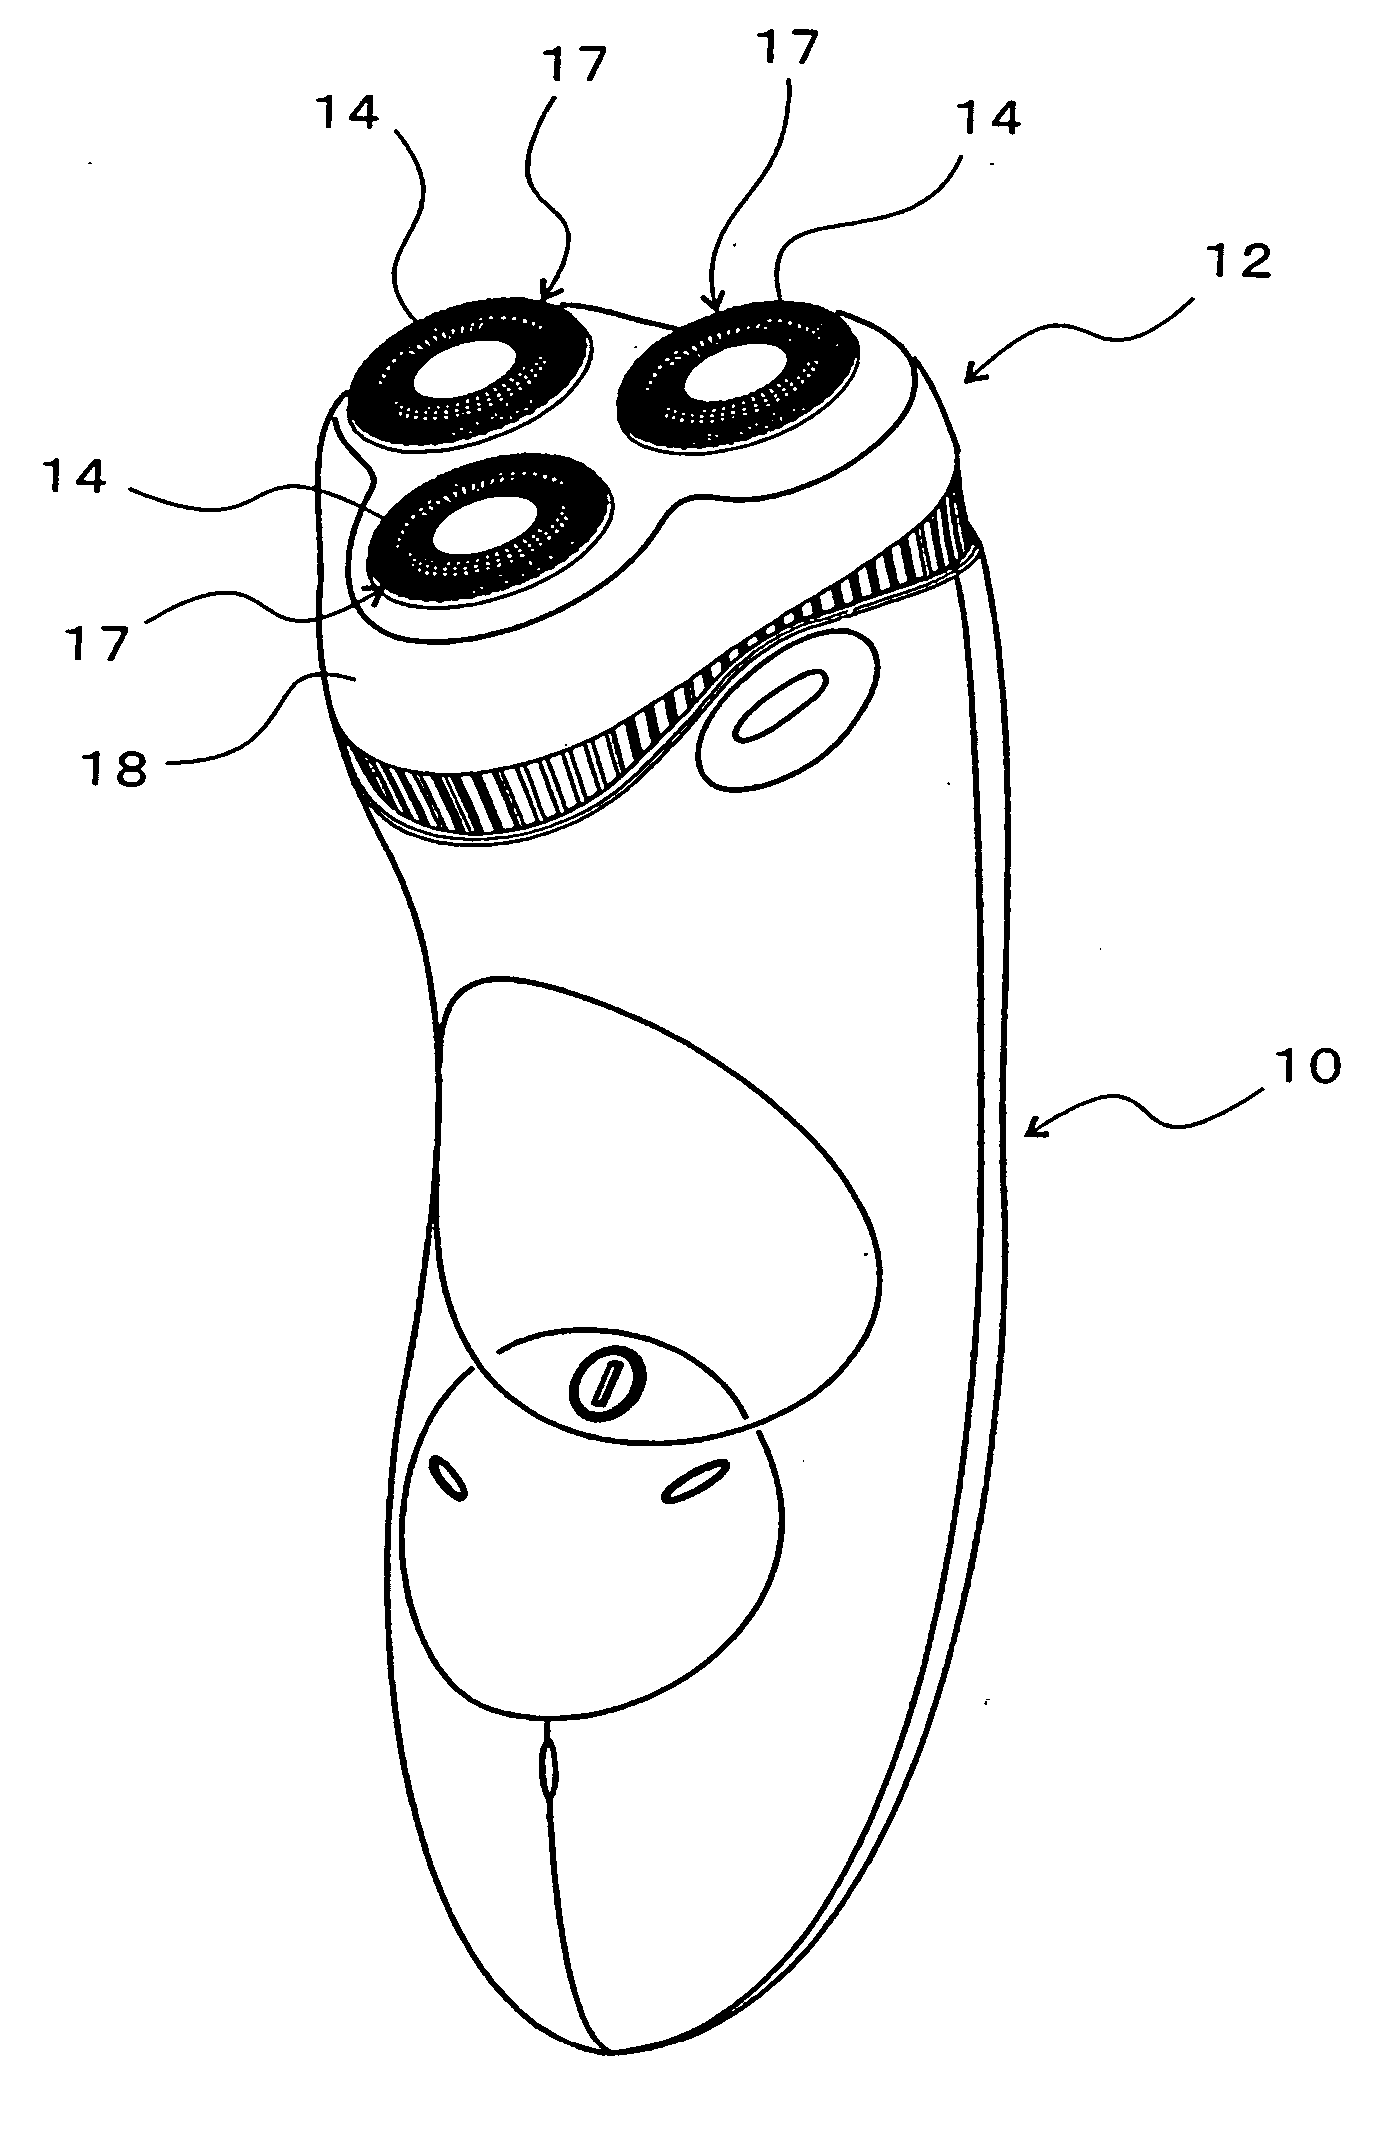 Rotary type electric shaver